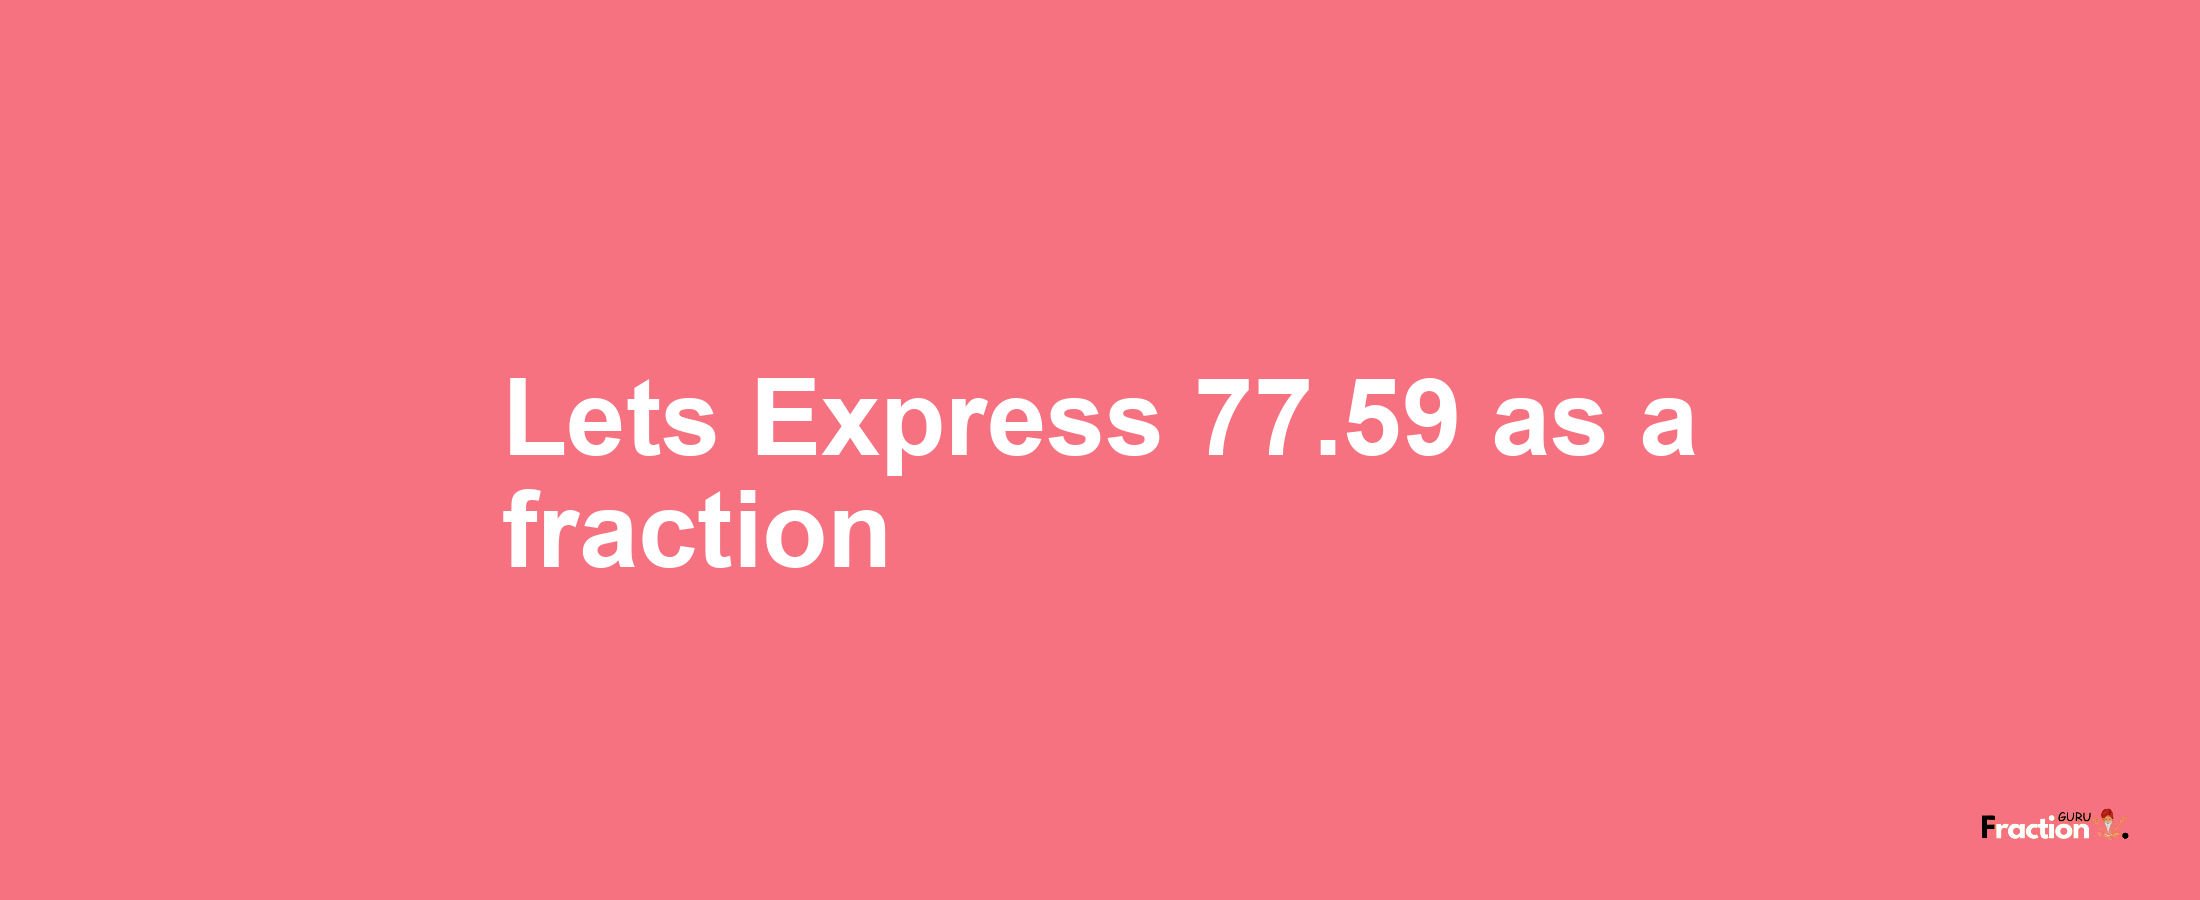 Lets Express 77.59 as afraction